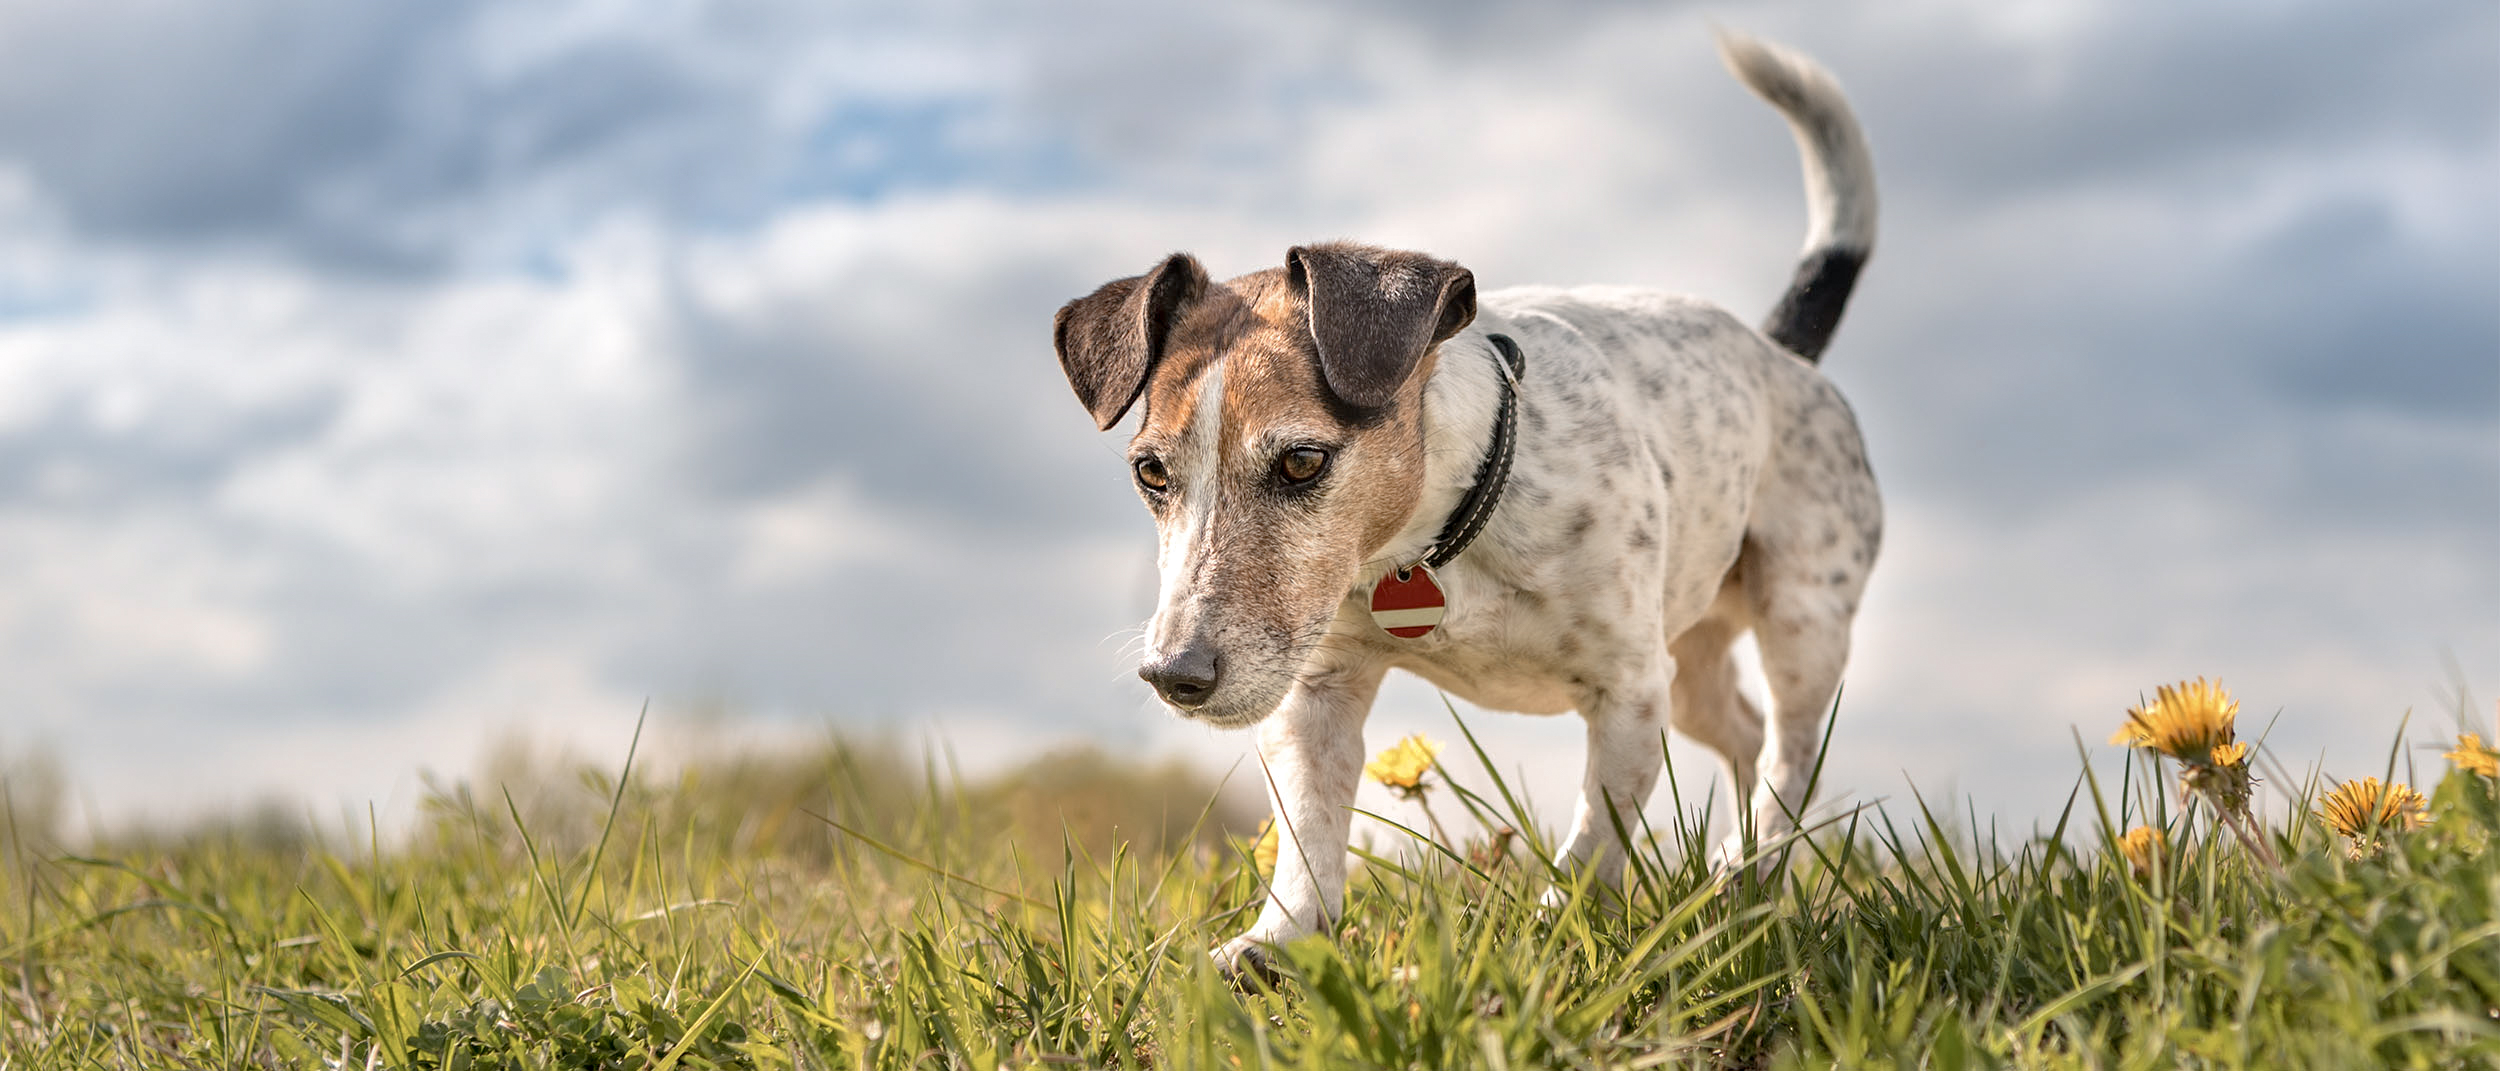 Adult Jack Russell walking through a field with face close to the grass.